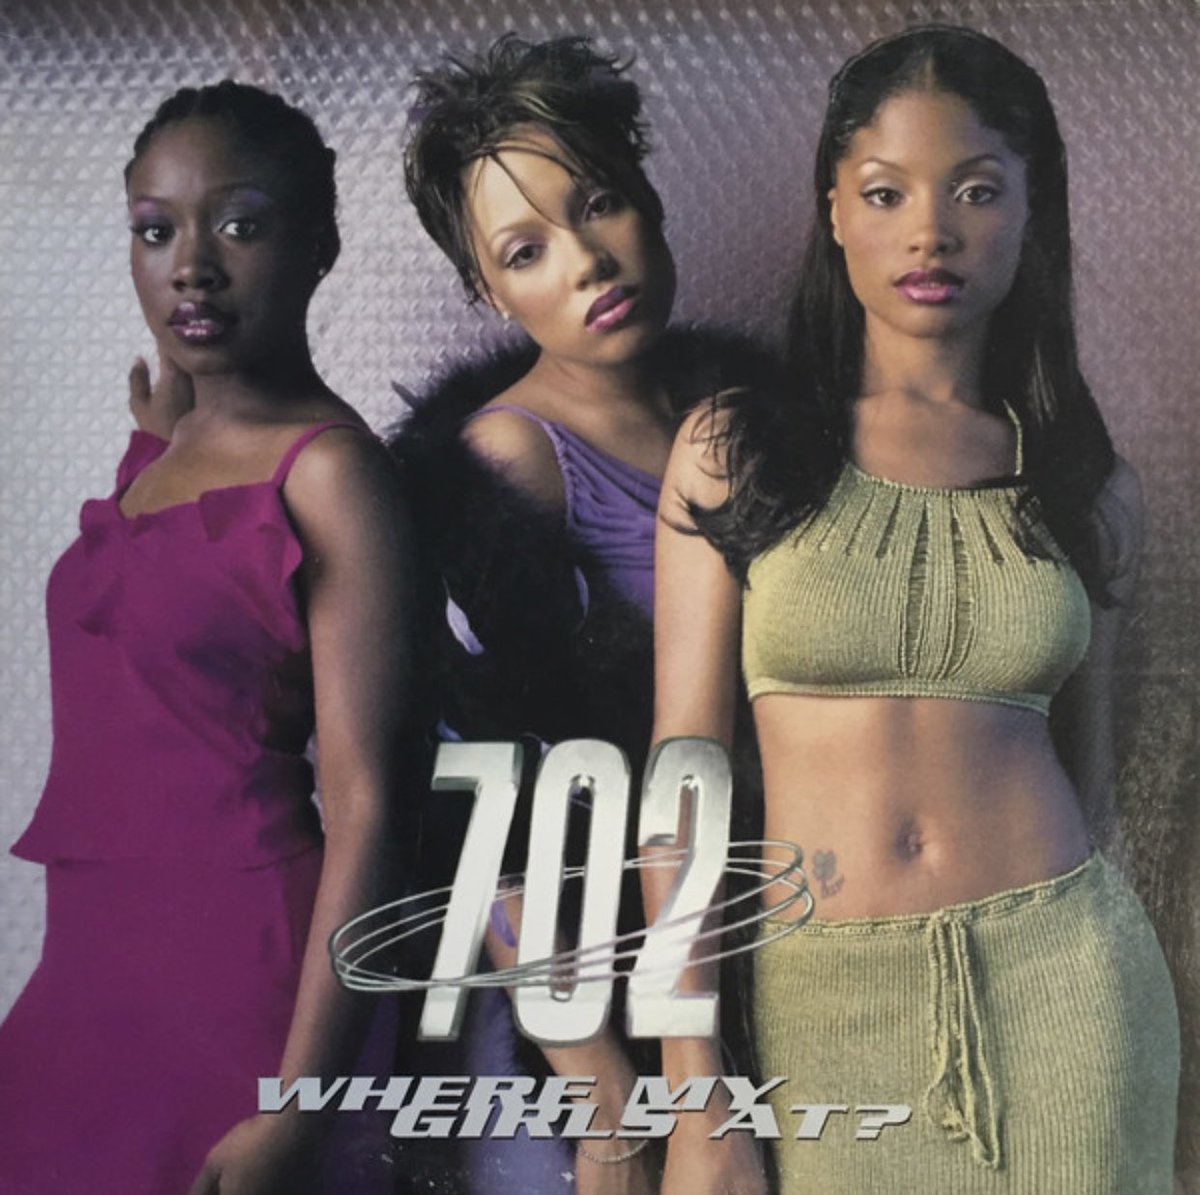 Which girl group had the best R&B song from the ‘99s• Where My Girls At• Bills, Bills, Bills• 808• I’m Good At Being Bad